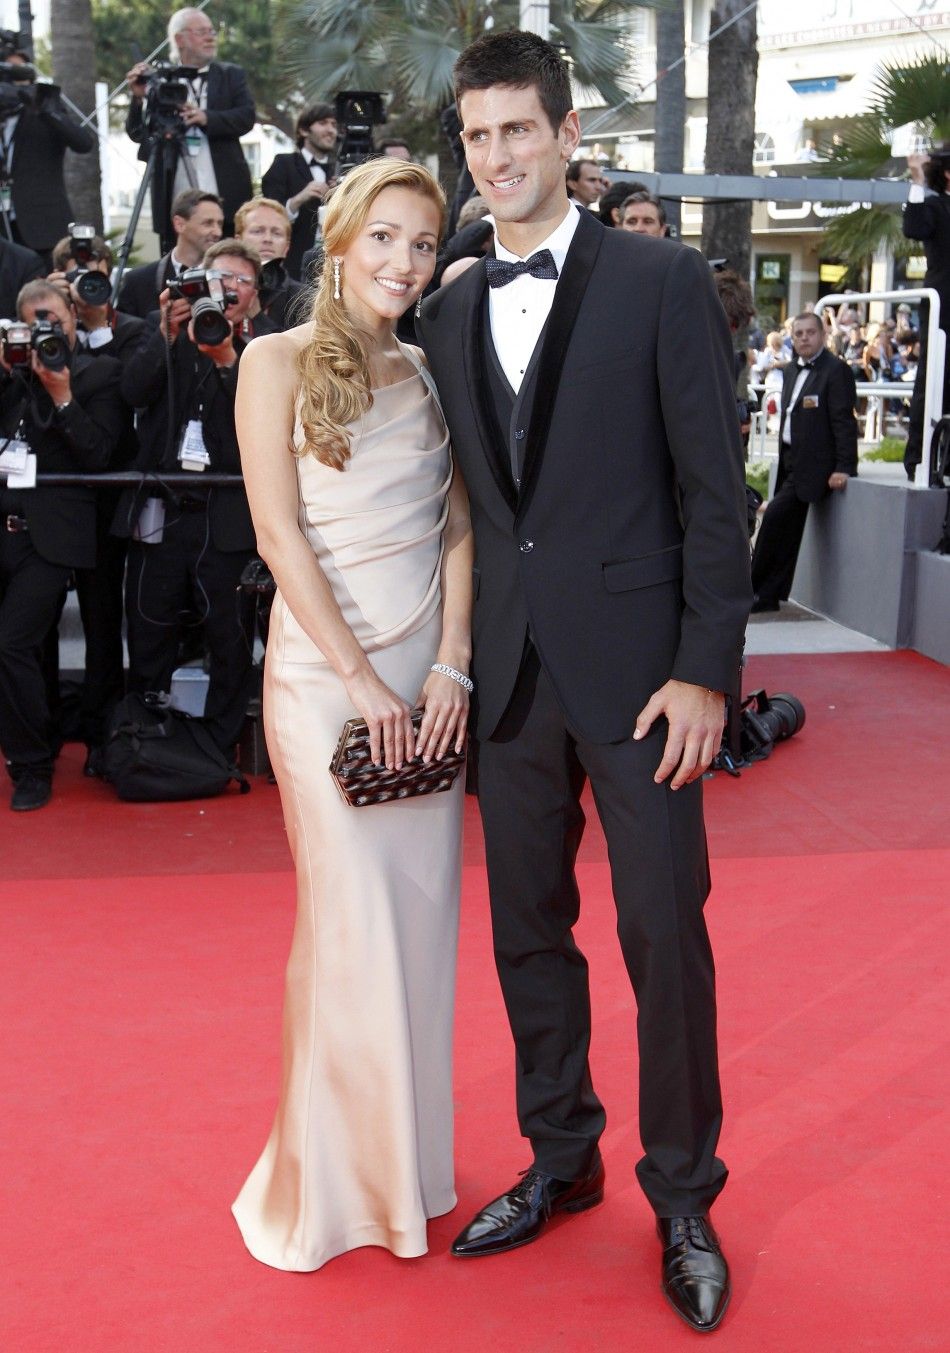 Tennis player Djokovic and girlfriend Ristic arrive on the red carpet for the screening of the film The Beaver at the 64th Cannes Film Festival